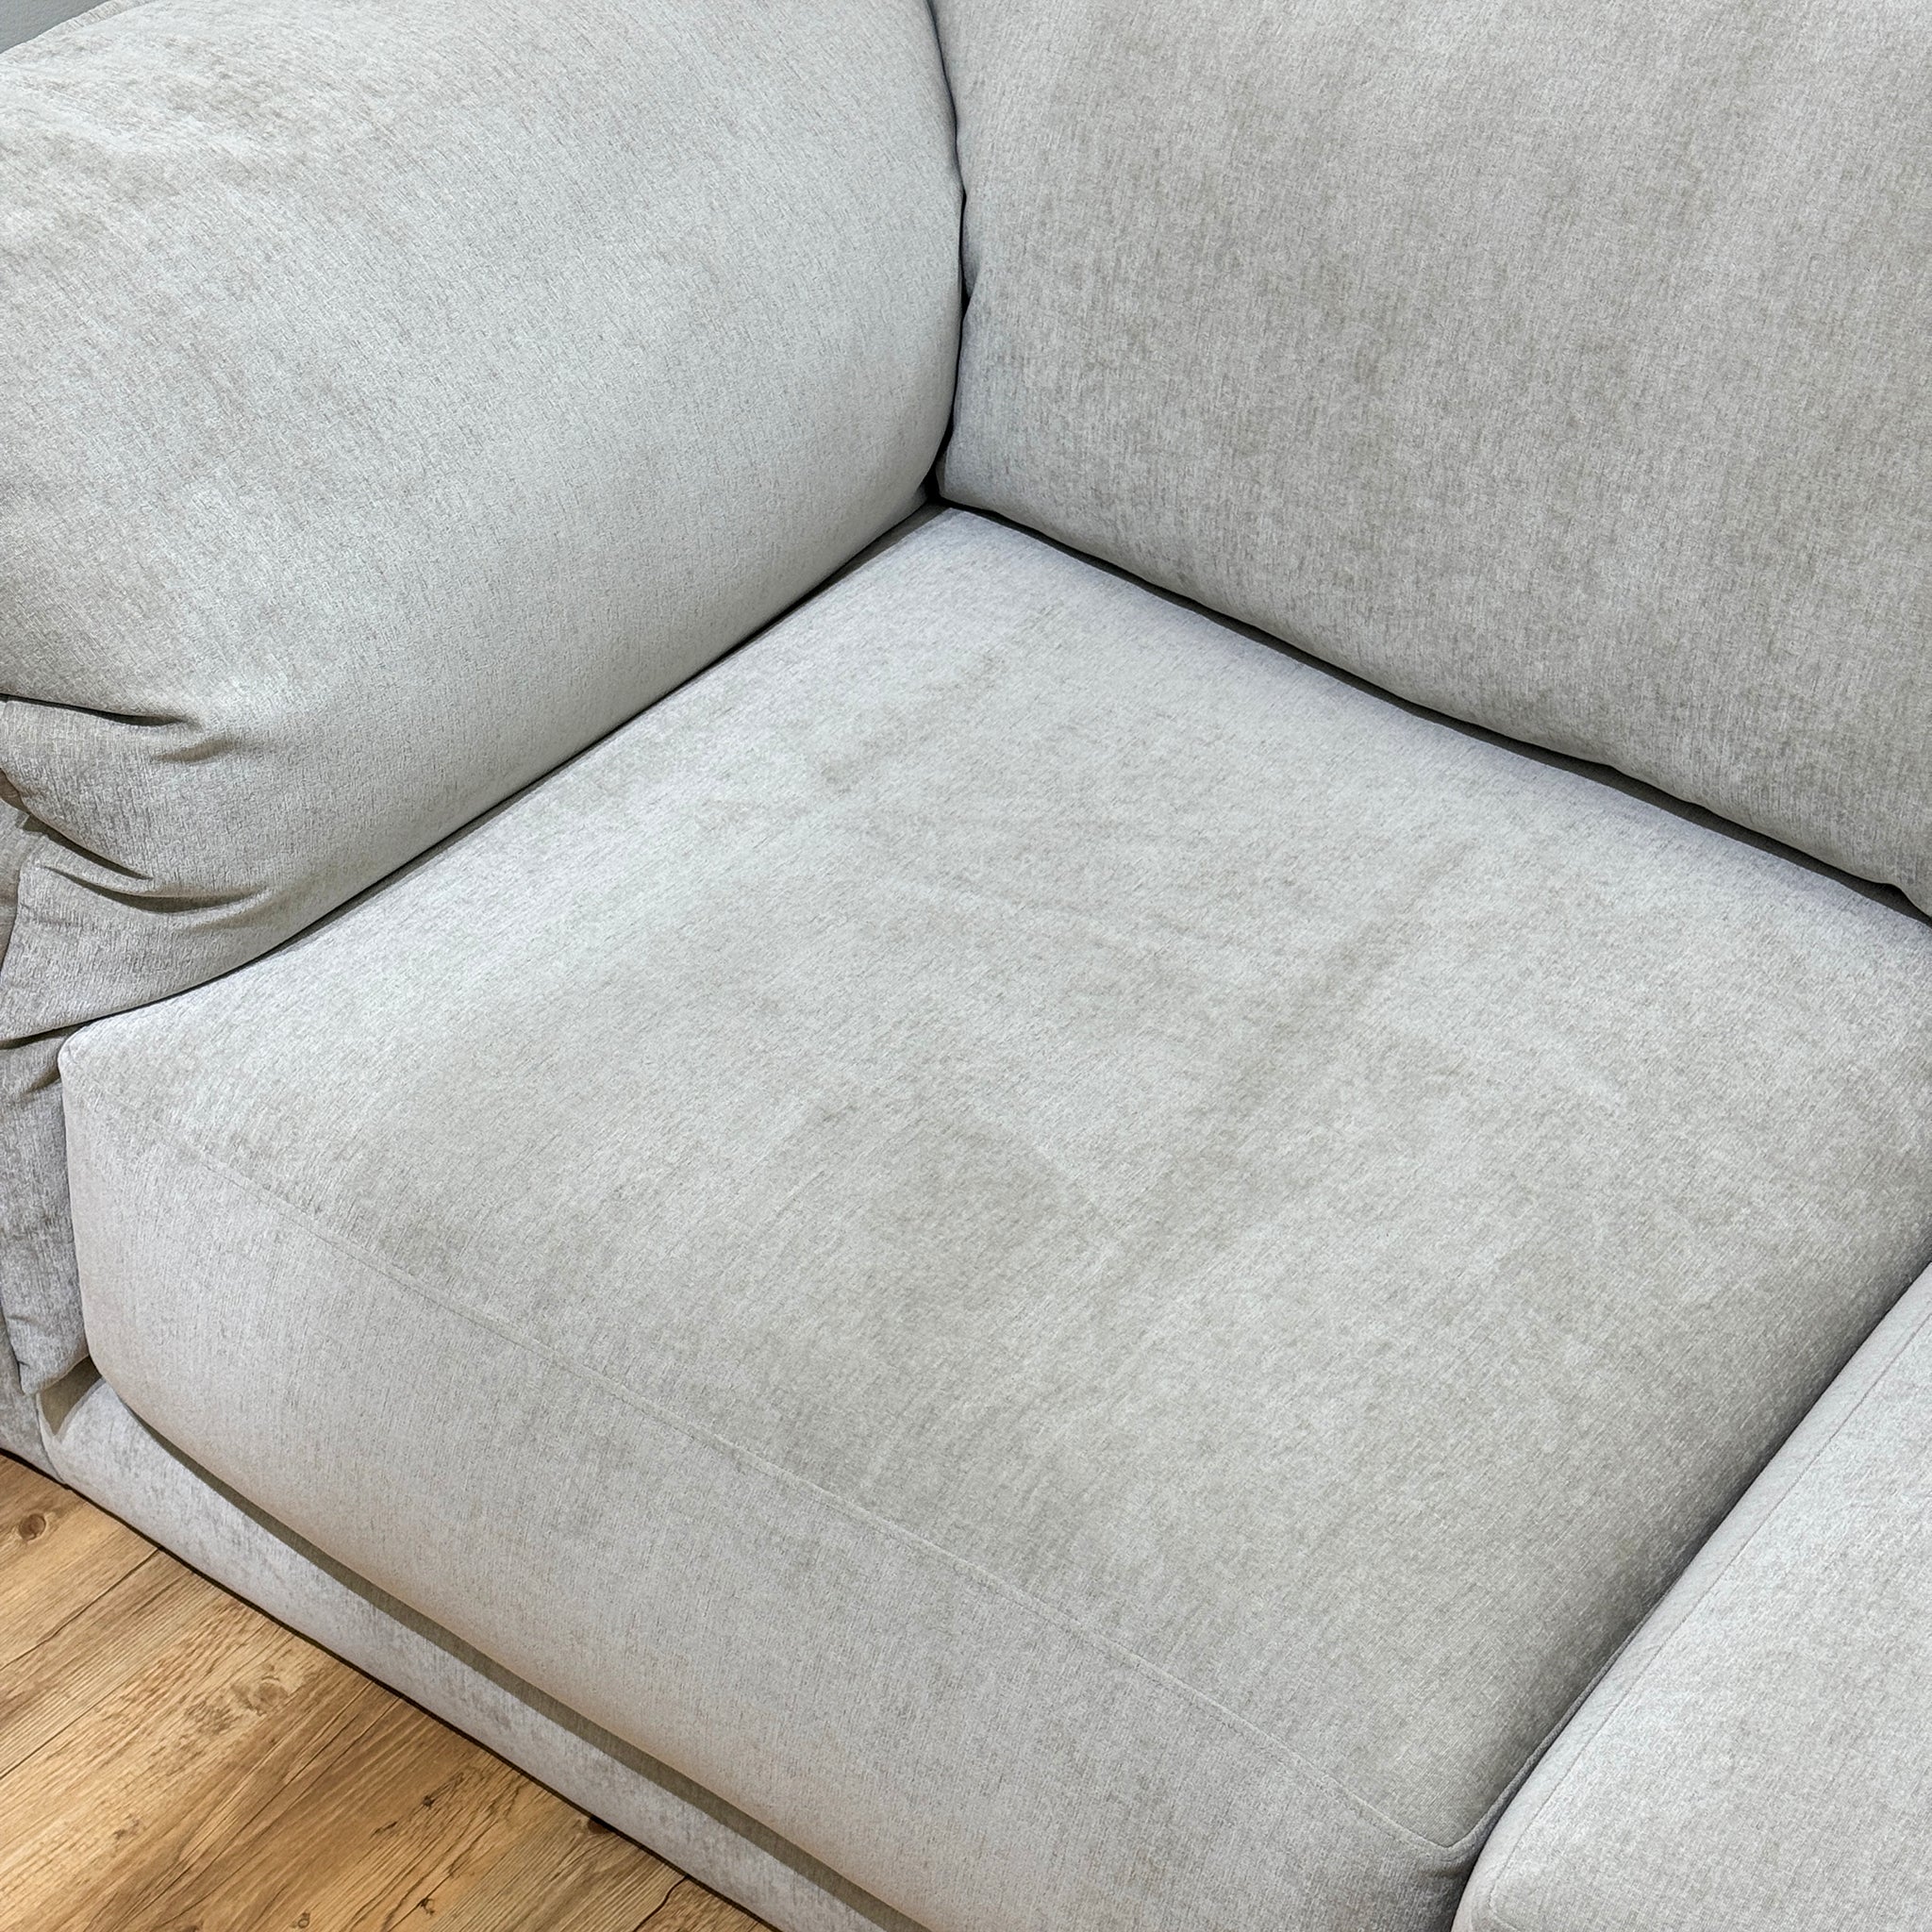 Close-up view of off-white Constance sofa back with button tufting, highlighting modern living room furniture